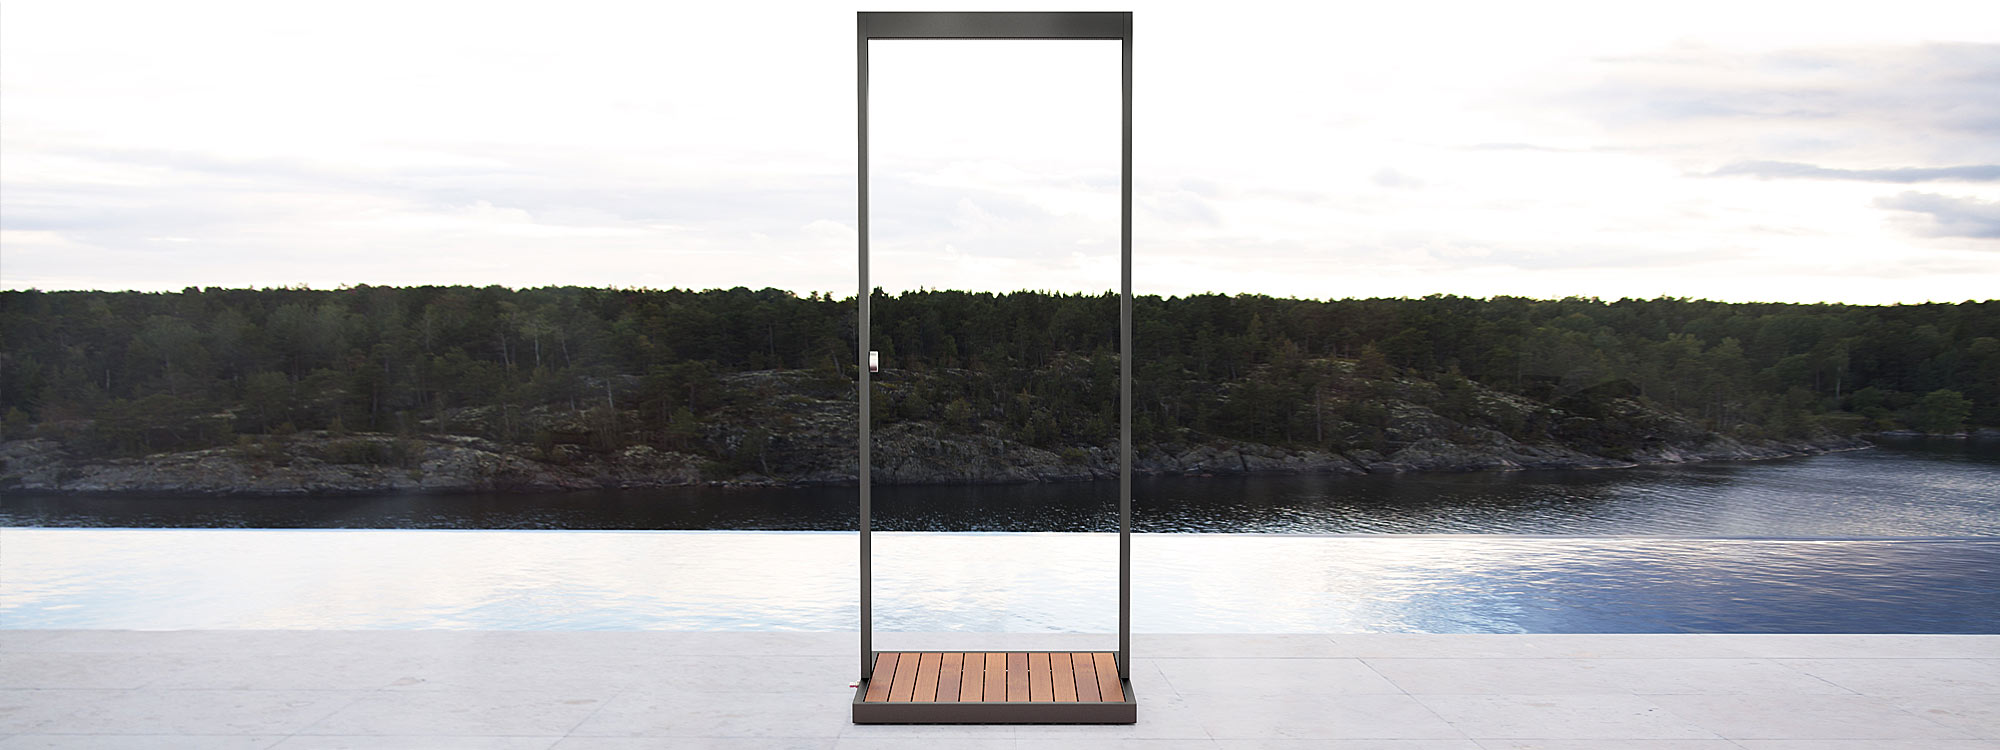 Garden Shower is a minimalist outdoor shower high quality exterior accessory materials by Roshults contemporary outdoor furniture company.